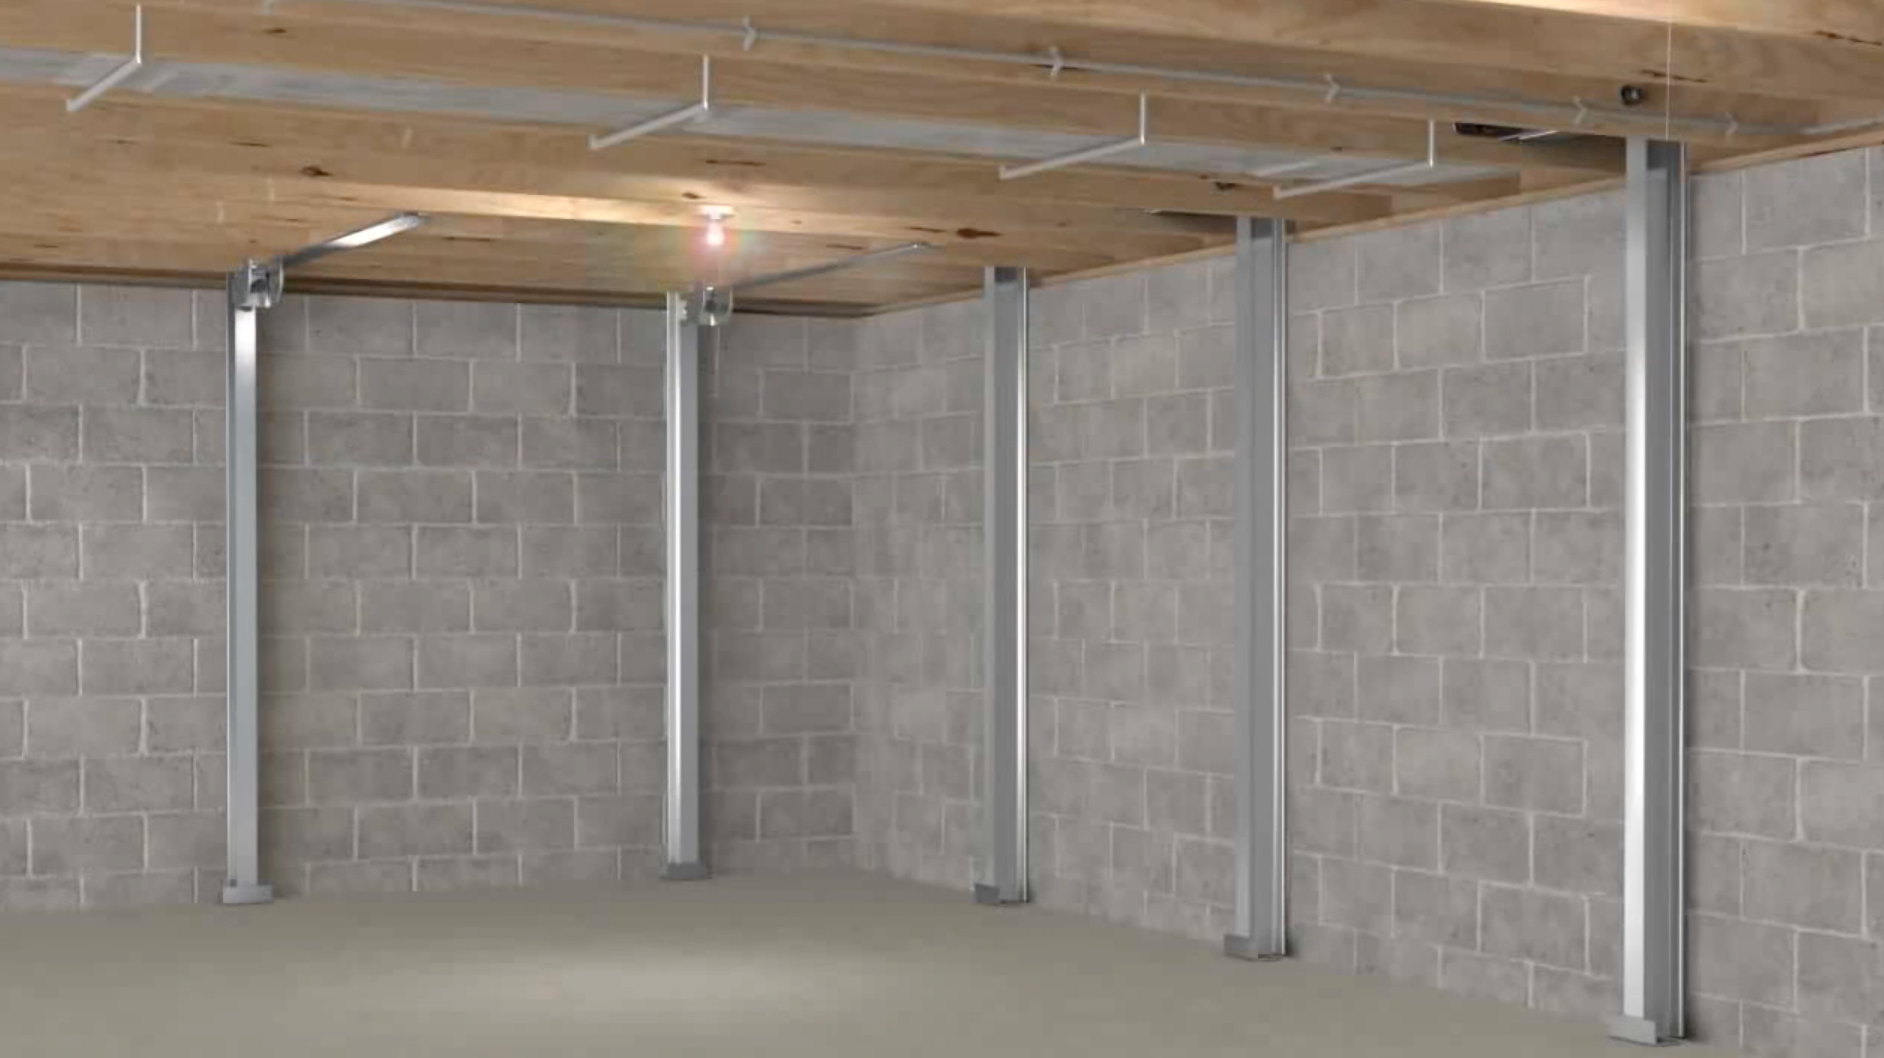 PowerBrace helps support foundation and cinder block walls.